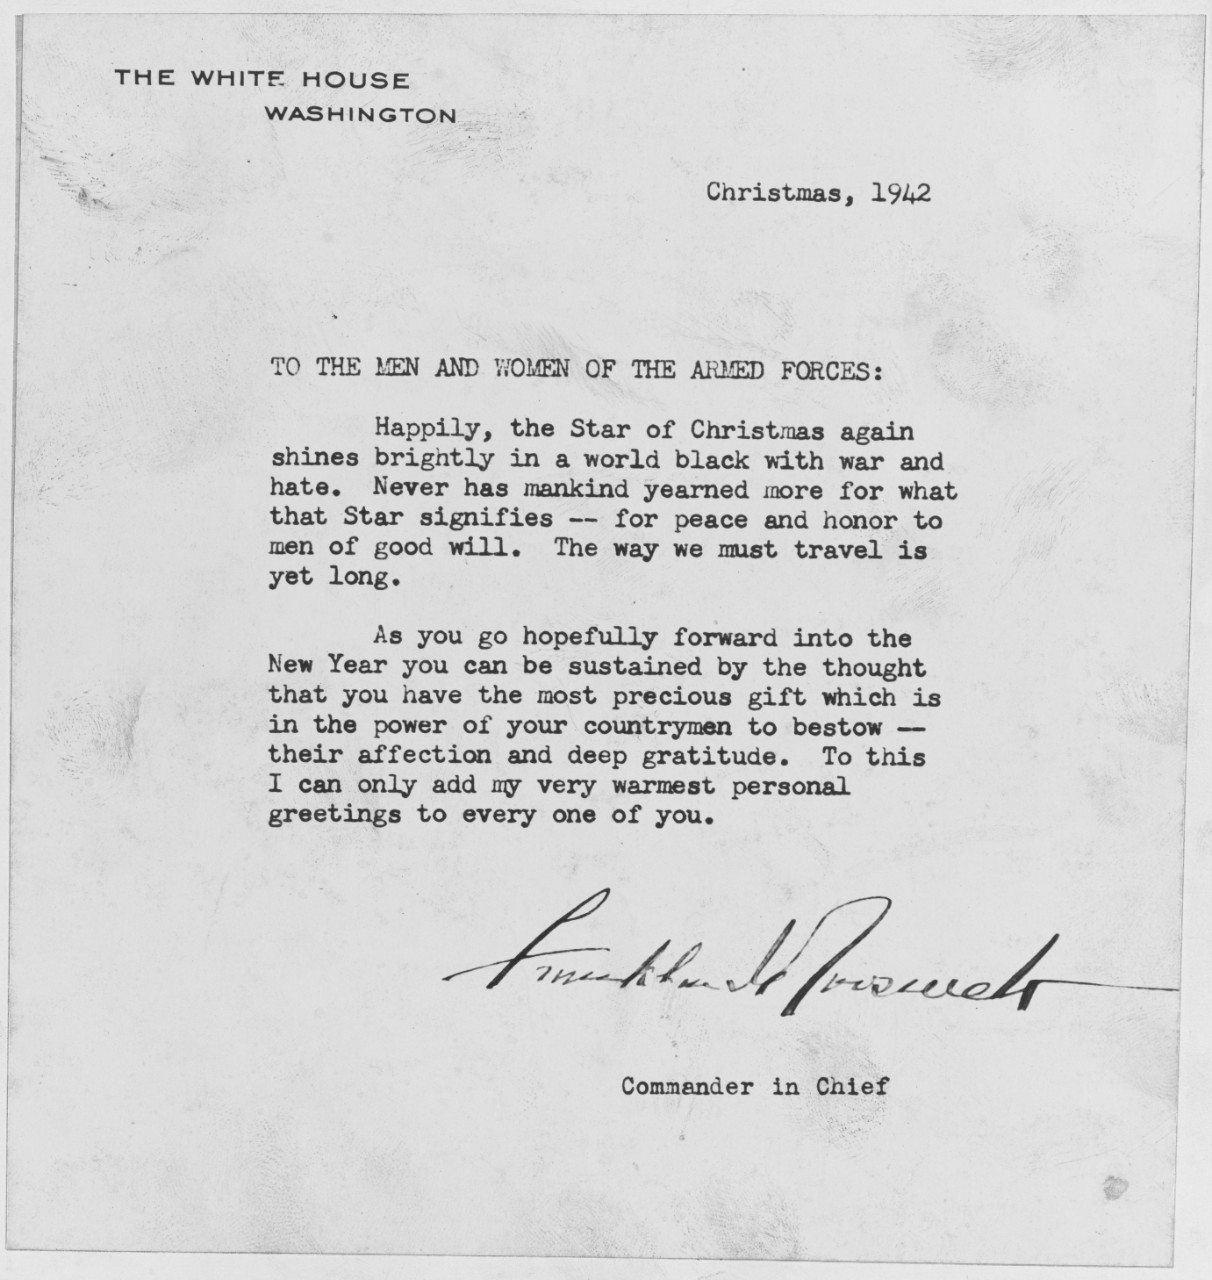 Letter from Franklin D. Roosevelt to the Men and Women of the Armed Forces, 1942.